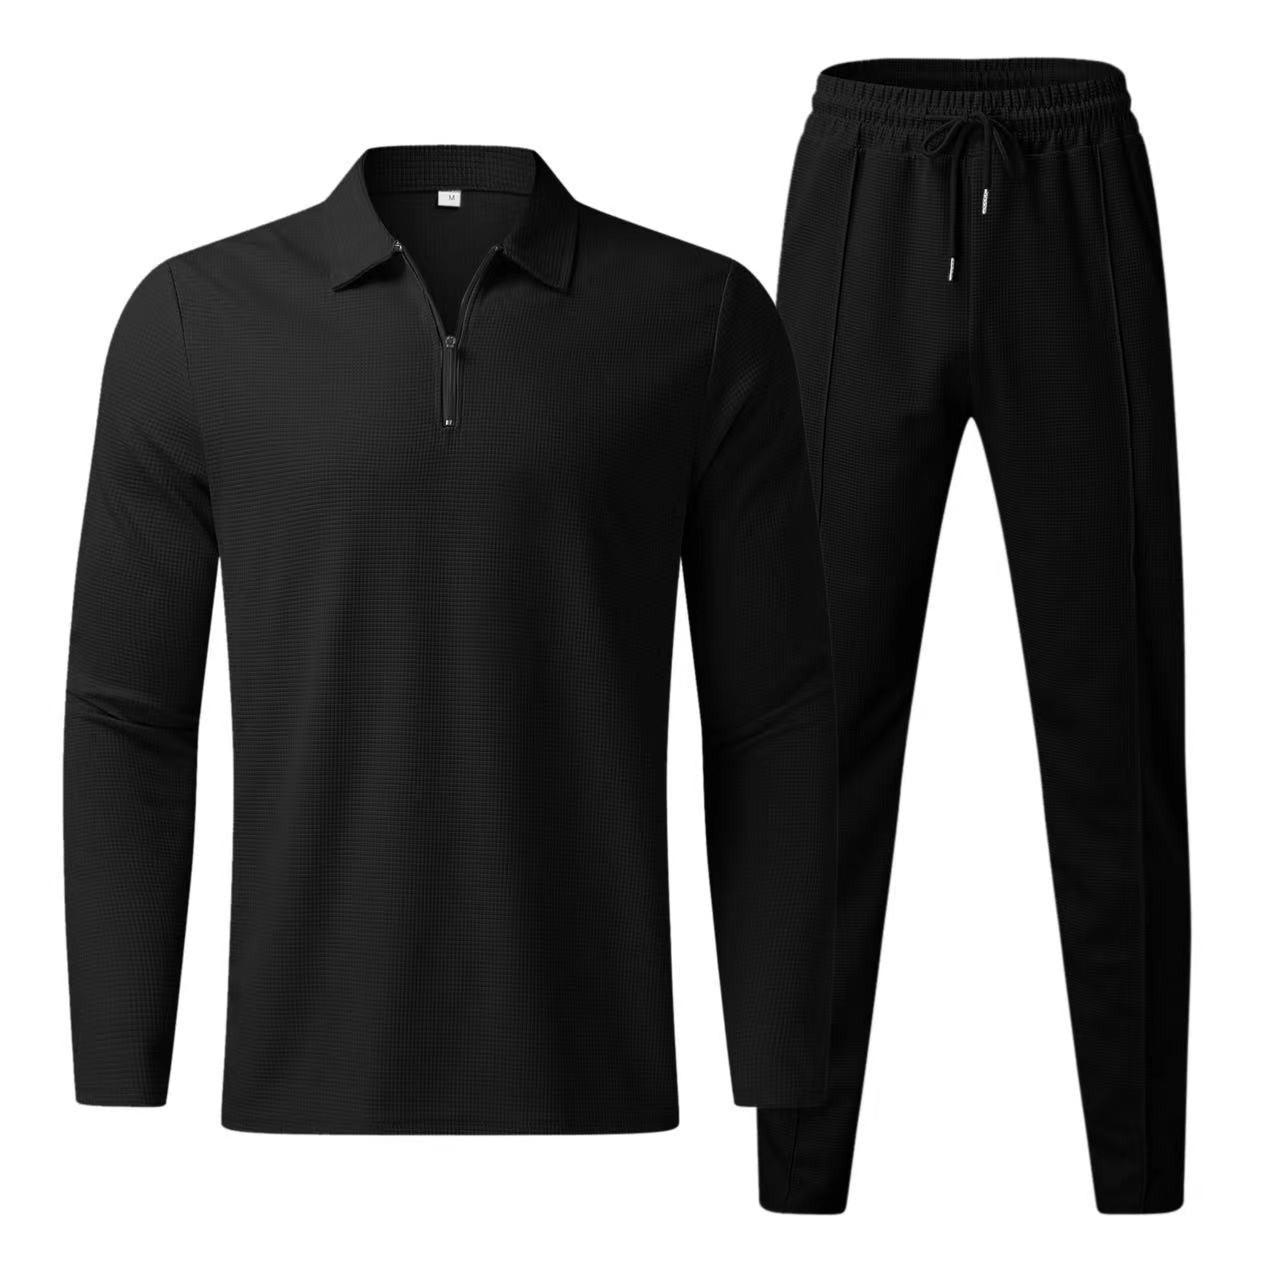 Men's casual sports suit with sleeves and long pants